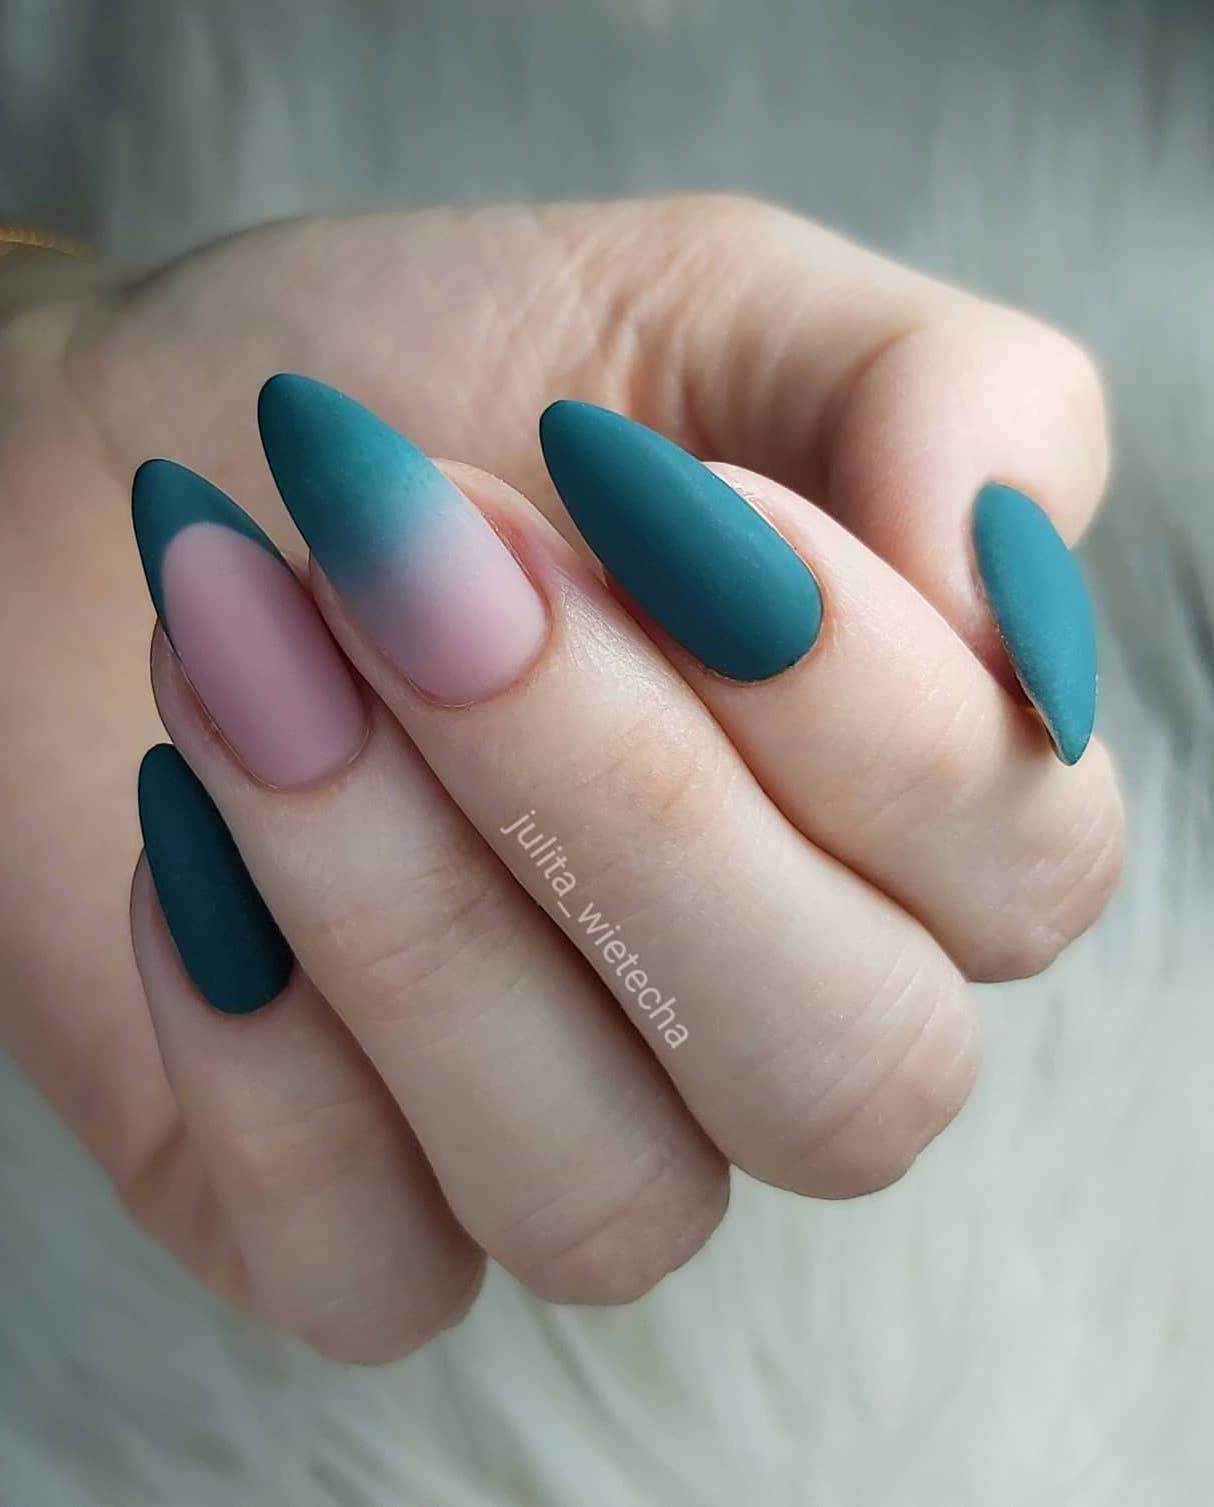 a hand with medium almond nails painted a dark green with a French tip accent nail and a nude to green ombre accent nail